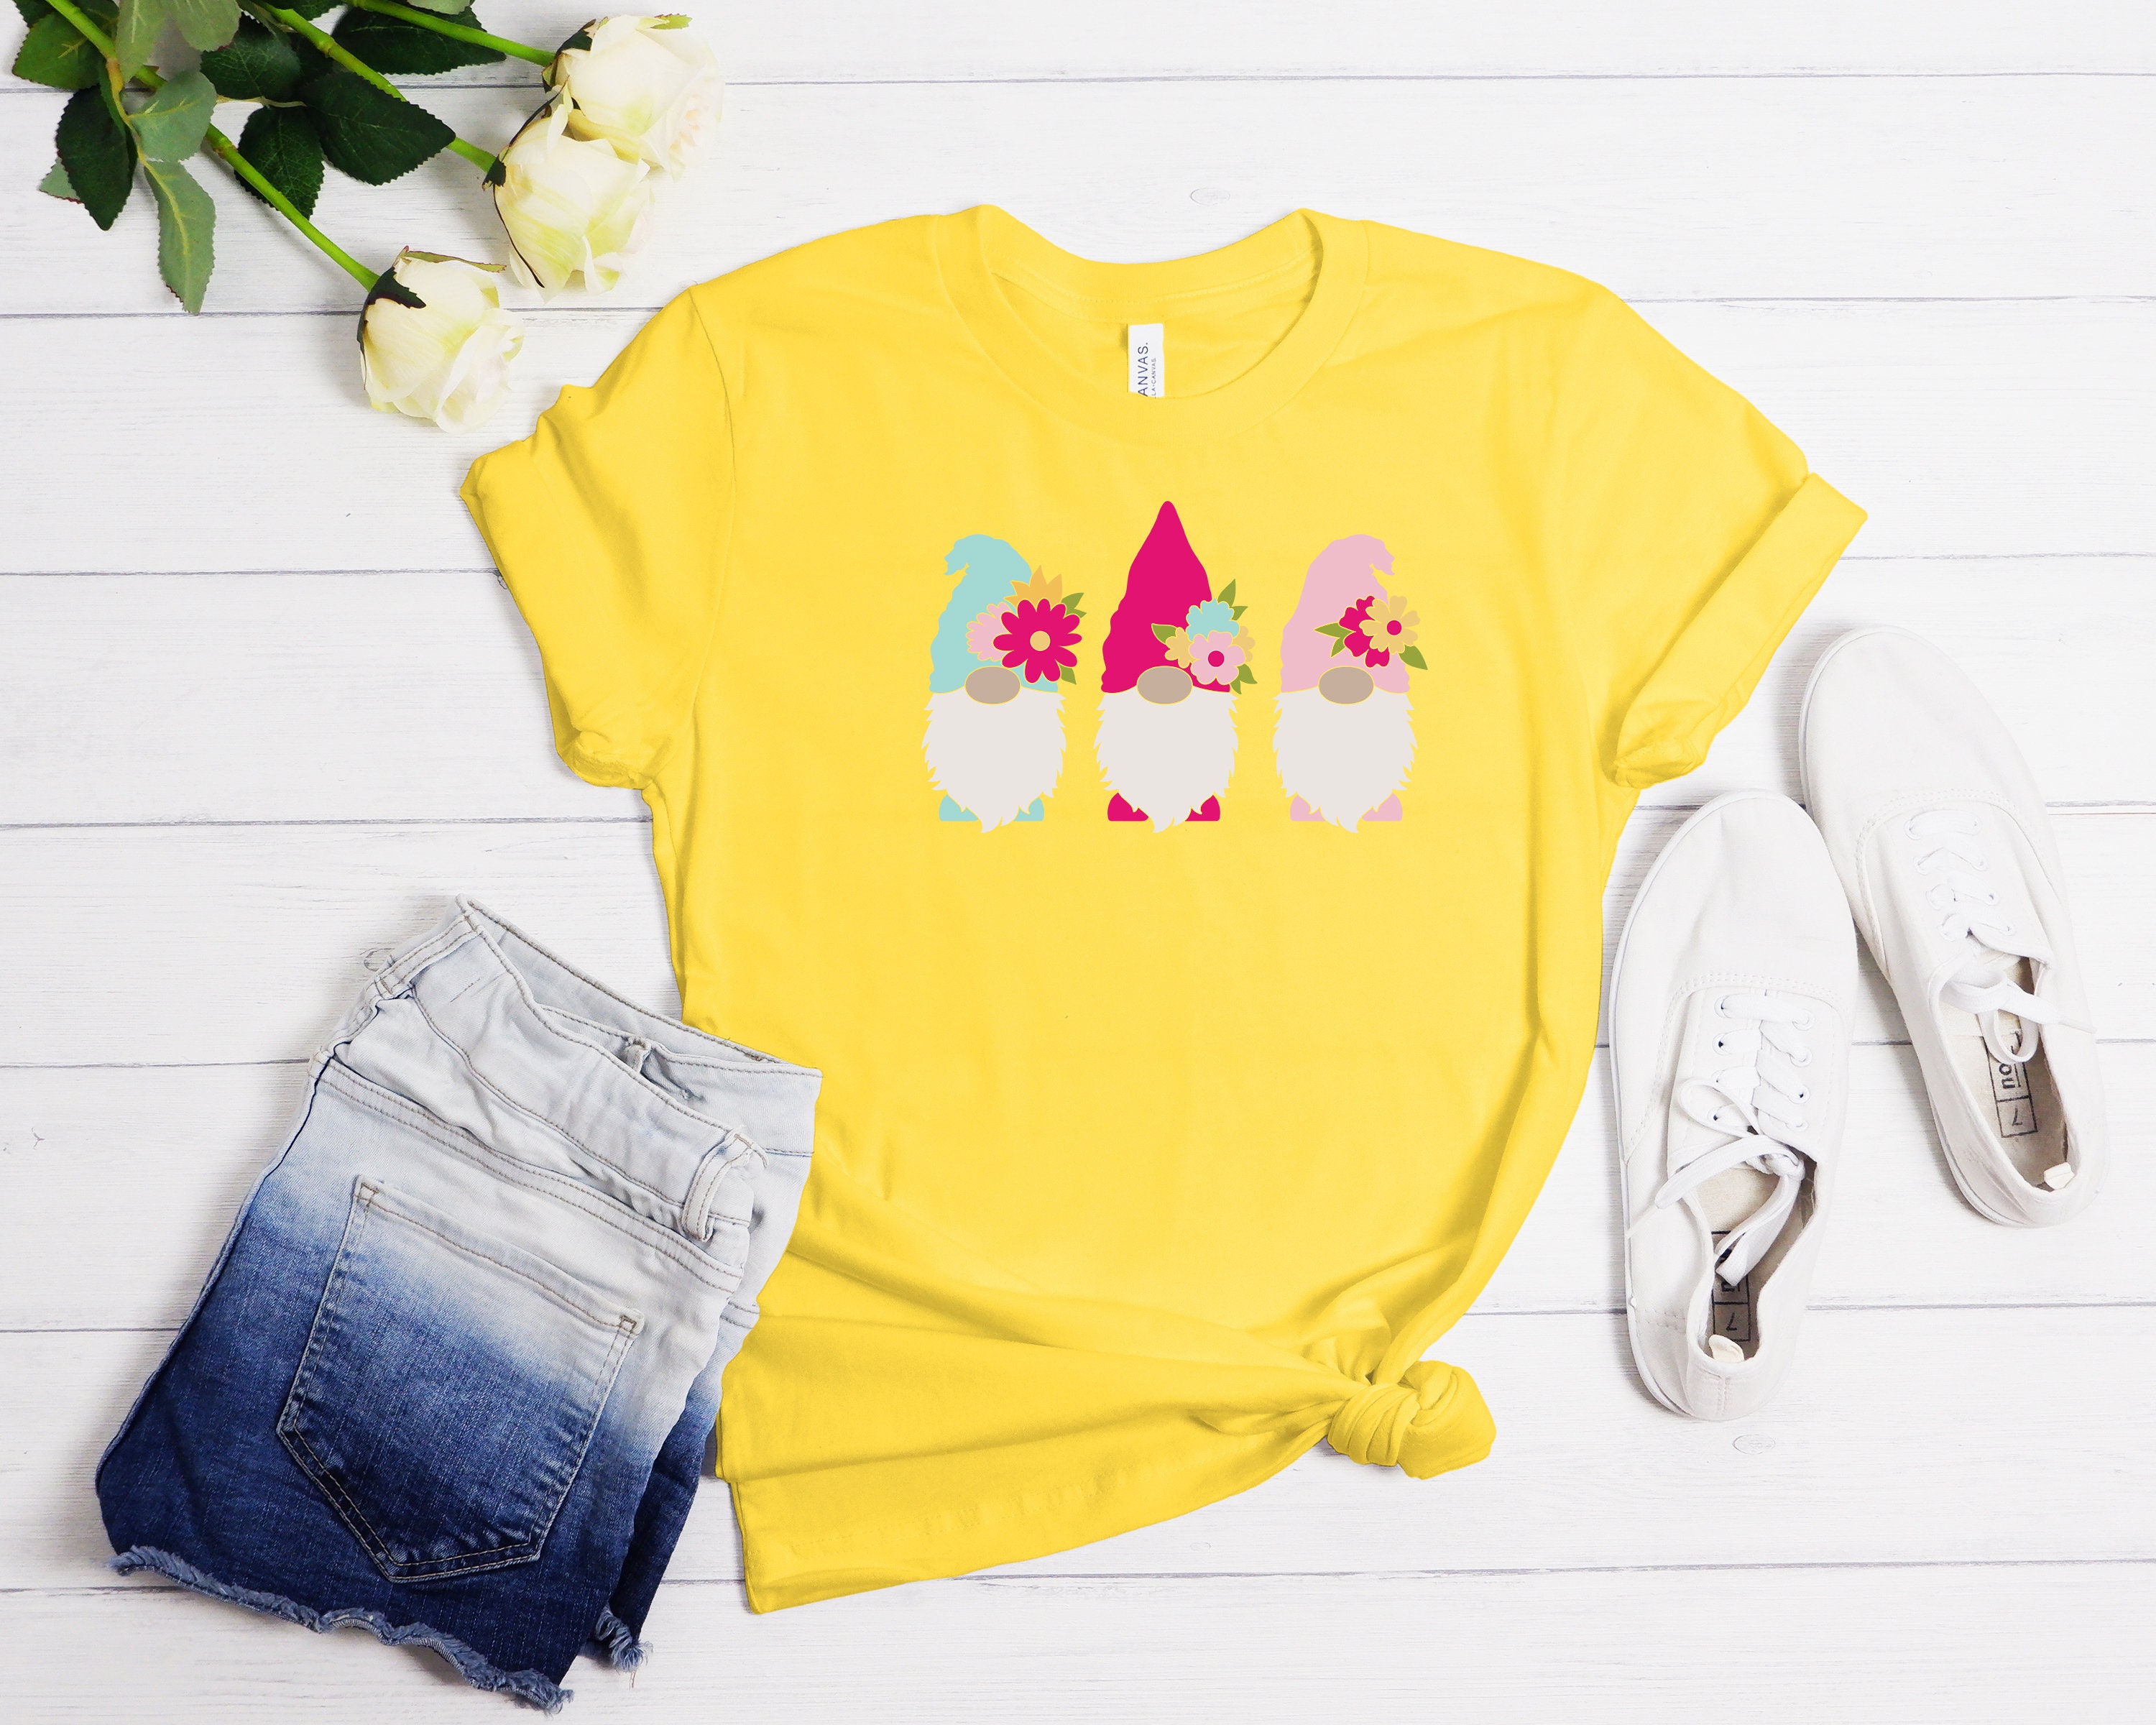 Discover Easter Gnome Shirt - Easter Holiday Shirts - Cute Gnome Graphic Tee - Family Easter T-Shirt